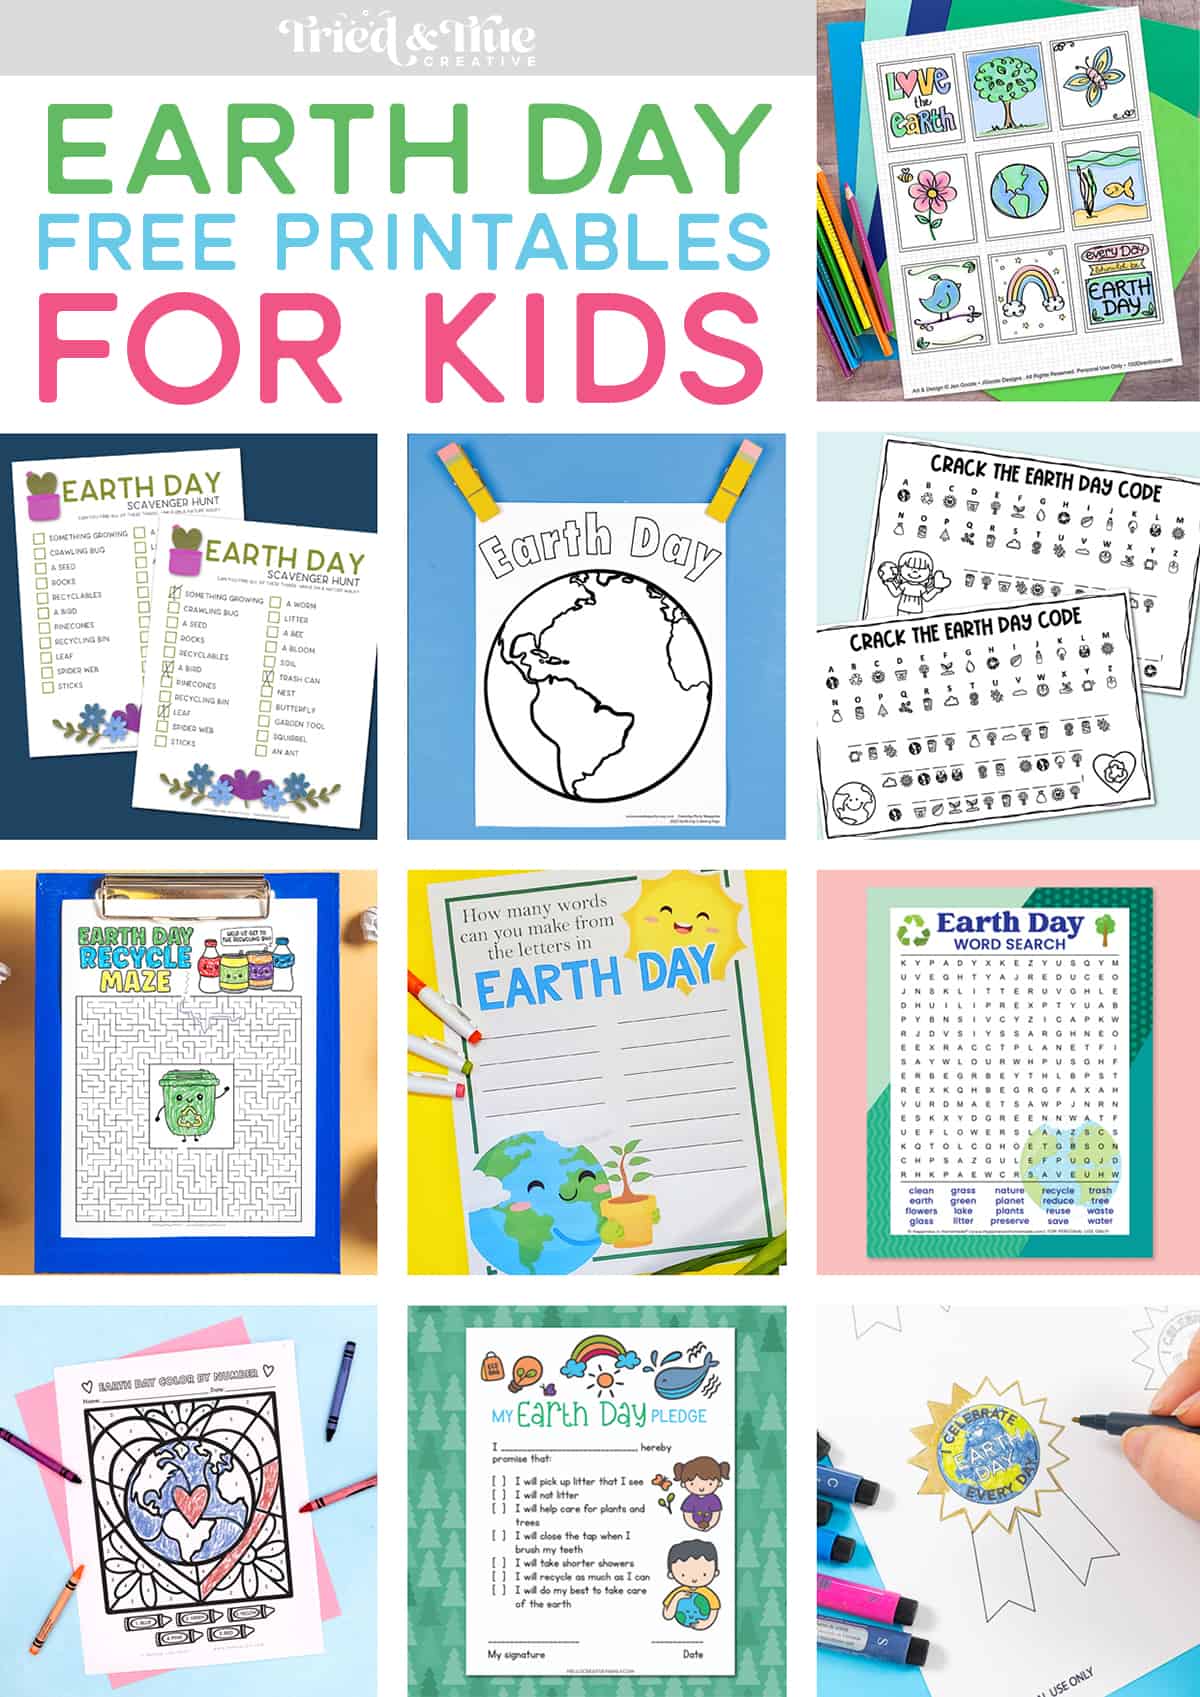 Collage of earth day free printables for kids.